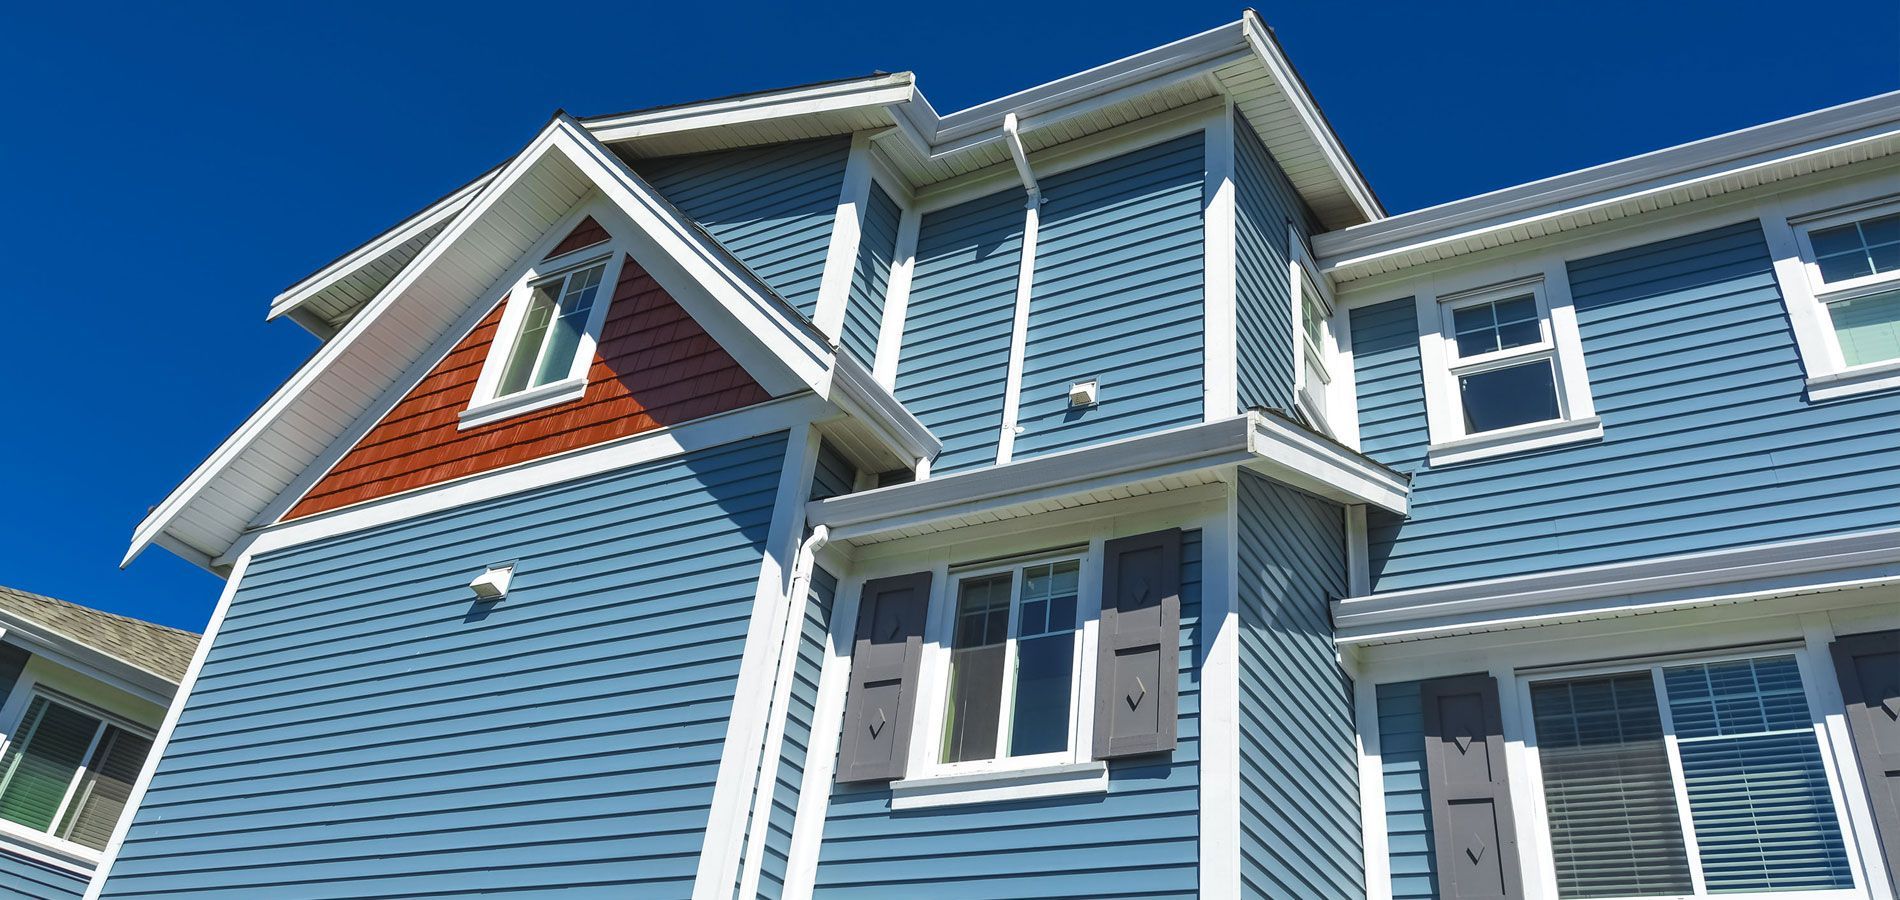 Diverse Home Siding Options Showcased